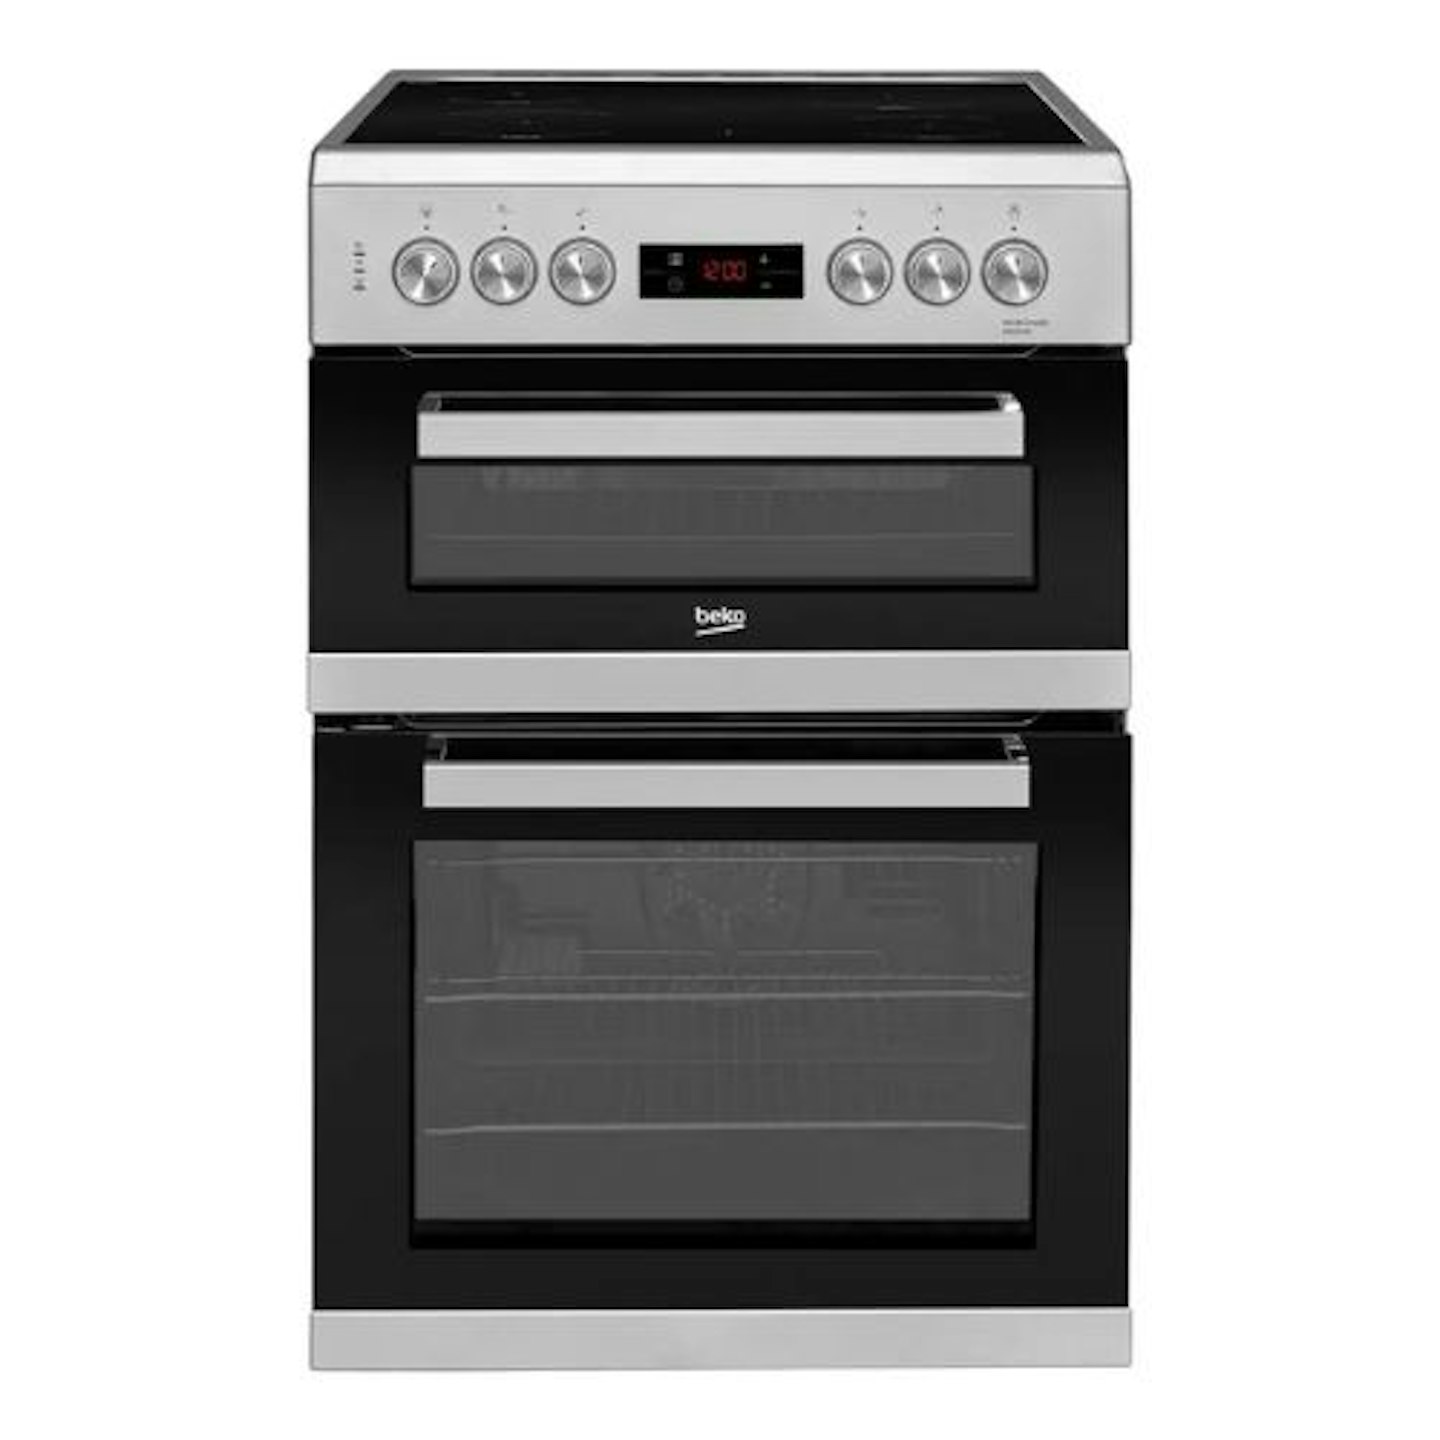 Beko KDC653S 60cm Double Oven Electric Cooker